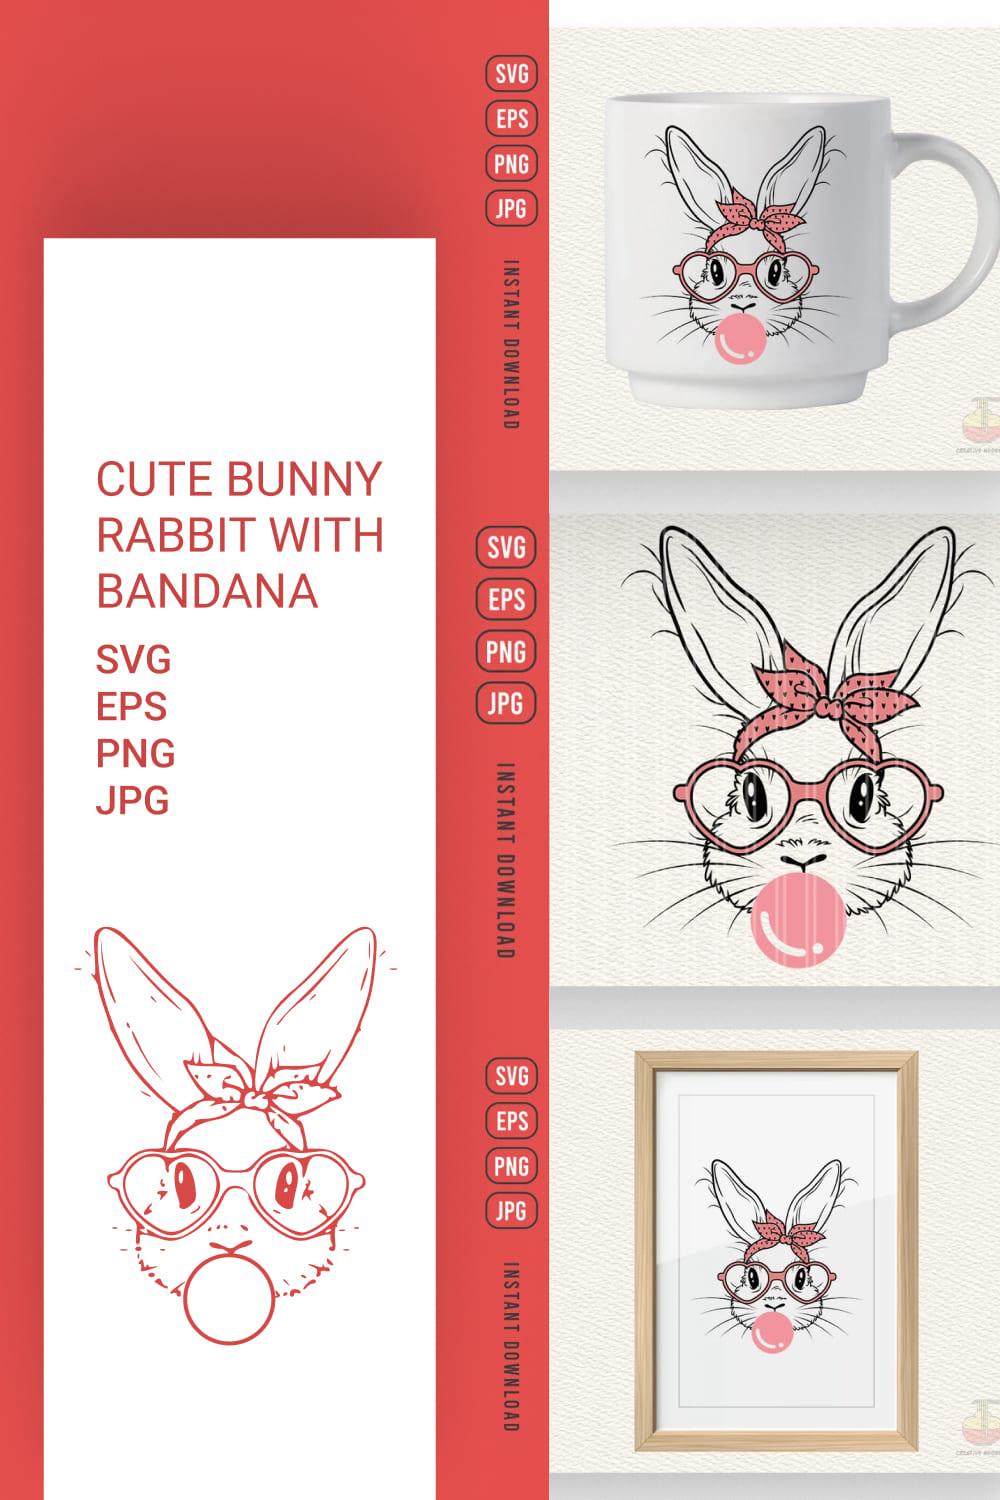 Cute bunny for your favorite cup.